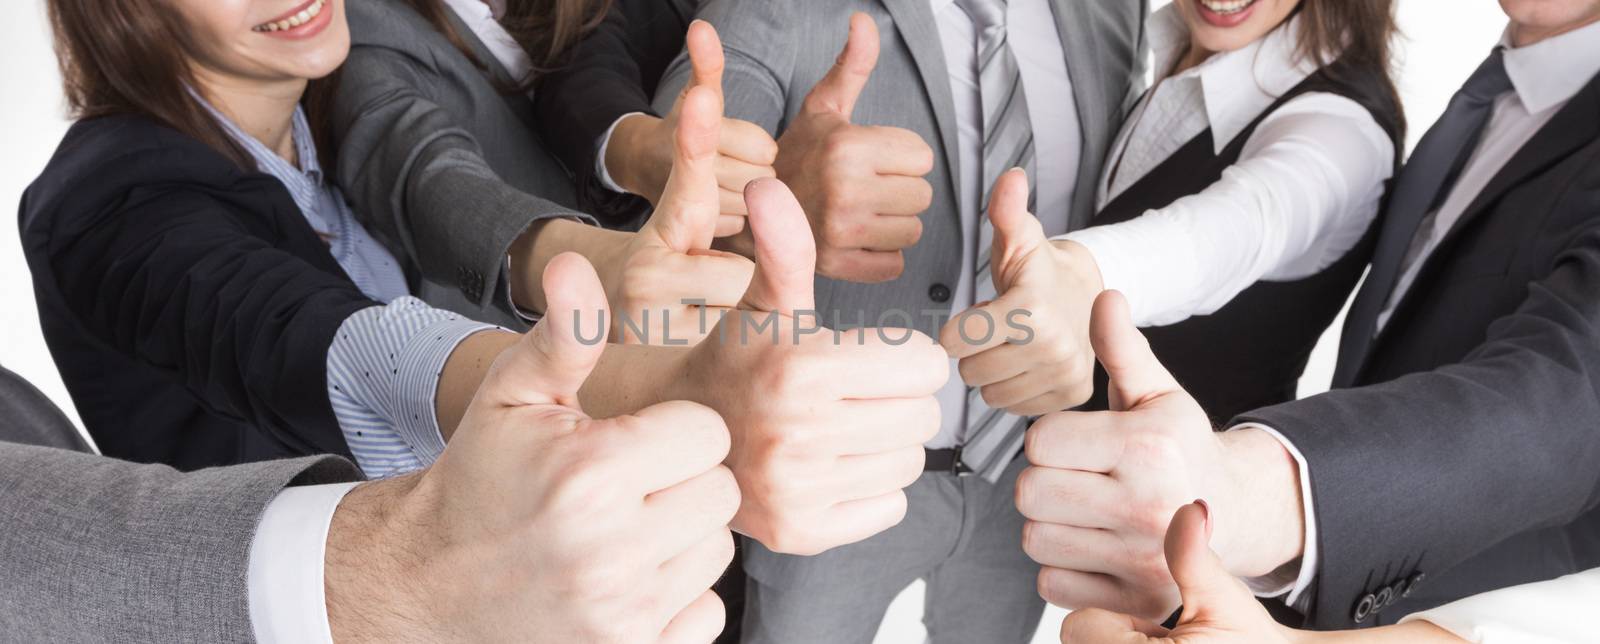 Cheering business people holding many thumbs thumbs up closeup